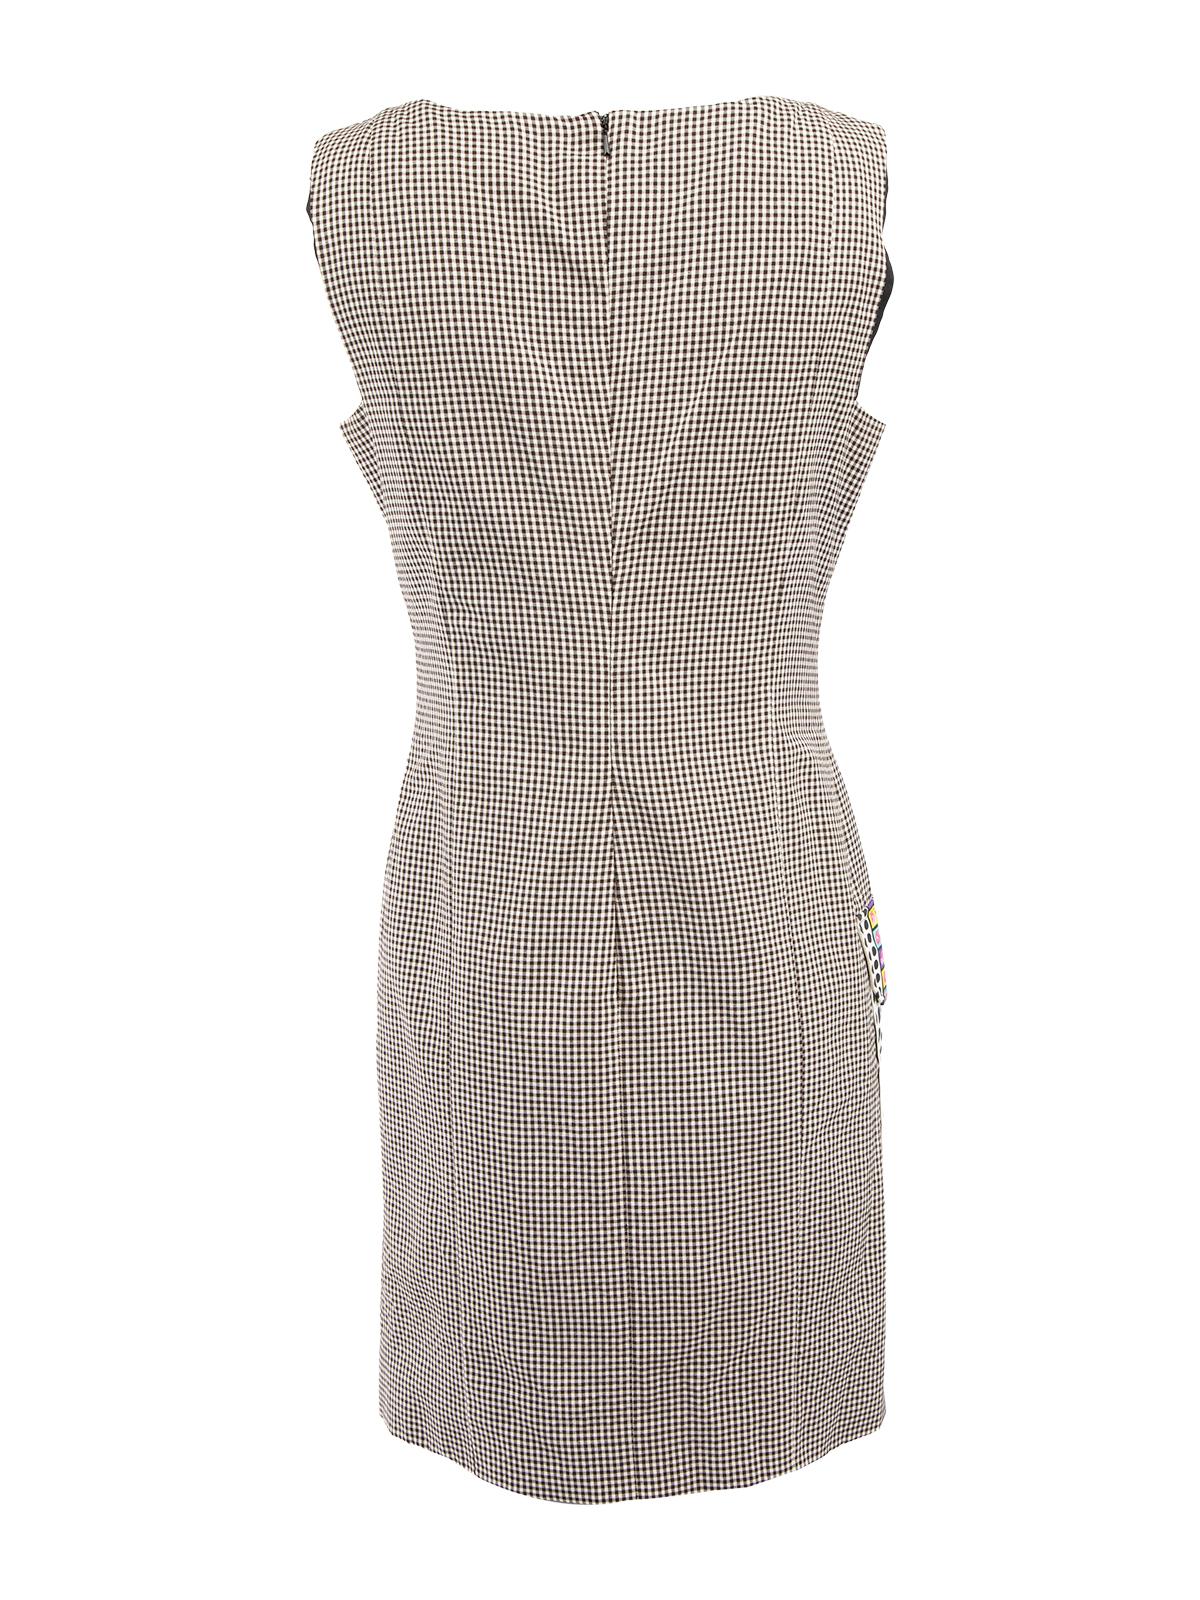 Versace Women's Gingham Dress with Contrast Pocket In Excellent Condition In London, GB